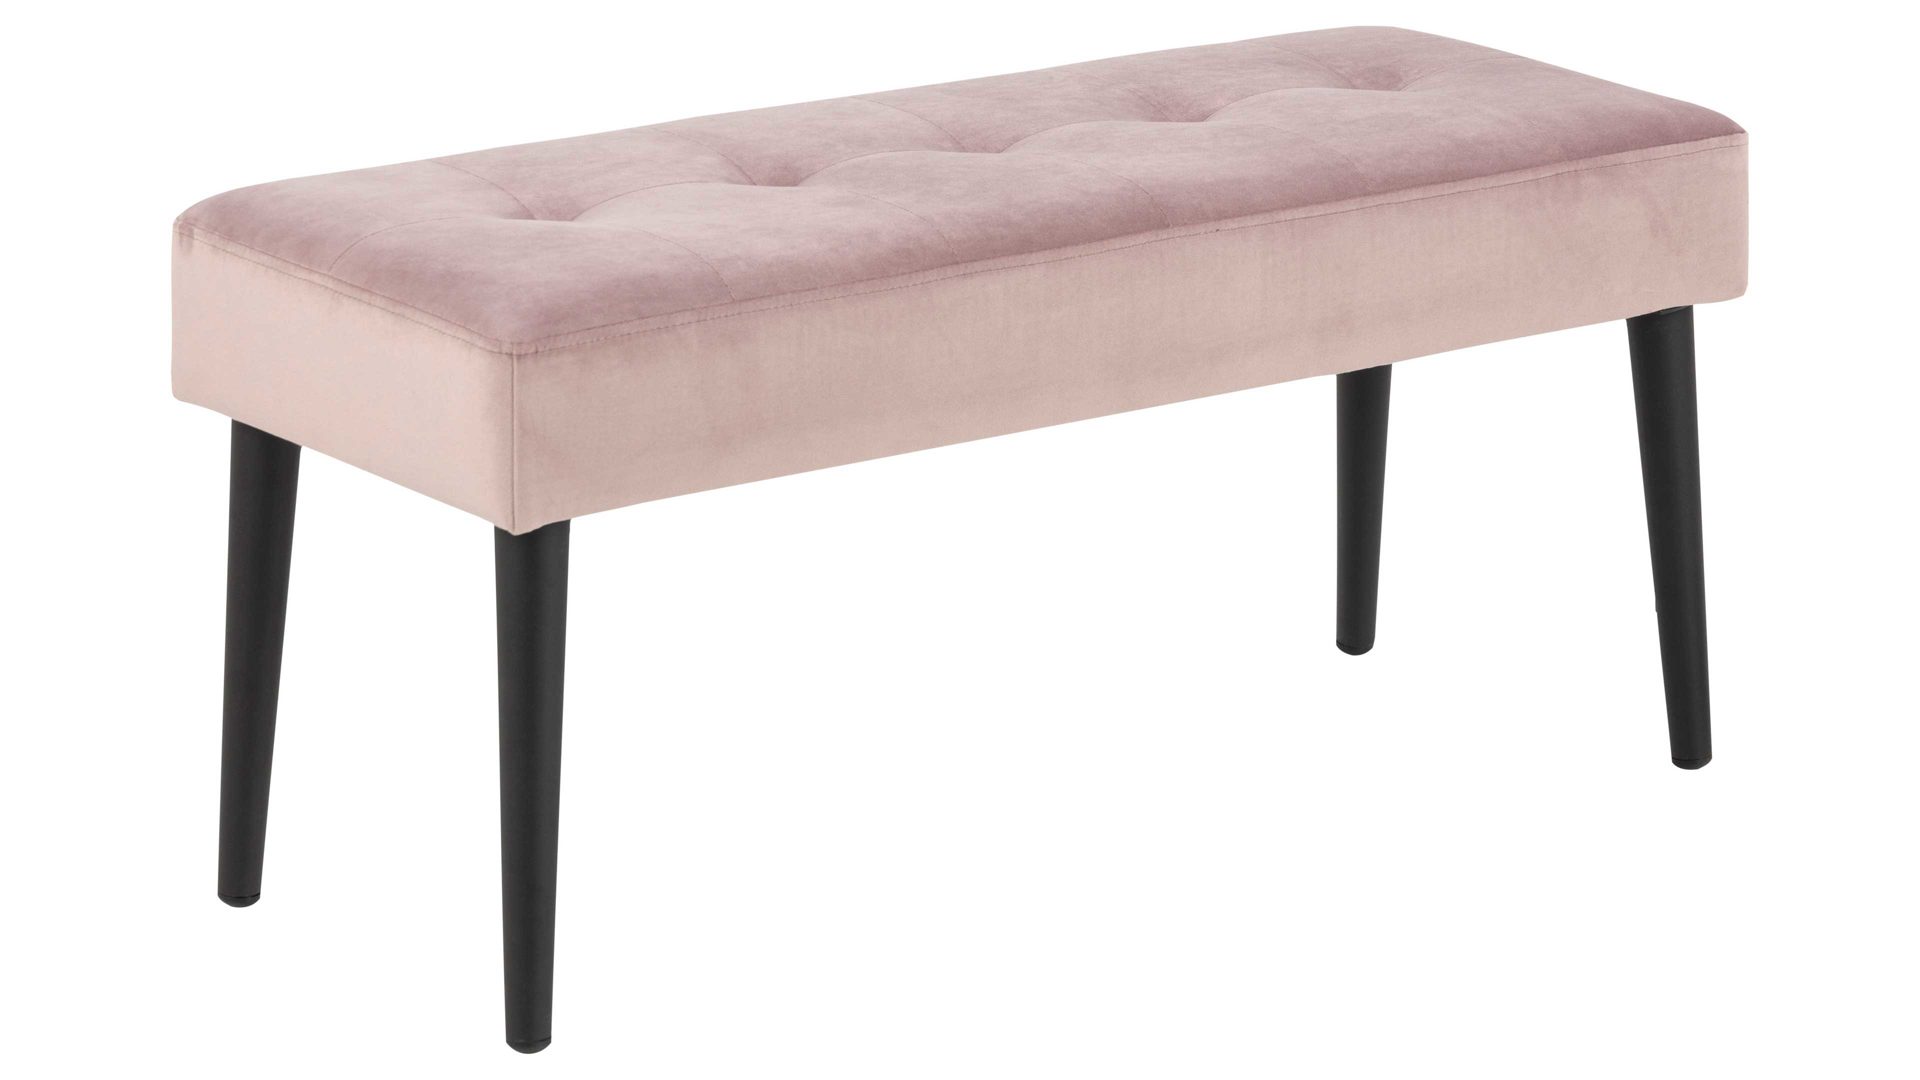 Polsterbank Actona group a/s aus Stoff in Pink Polsterbank Glory altrosa Samt Vic 18 - Länge ca. 140 cm